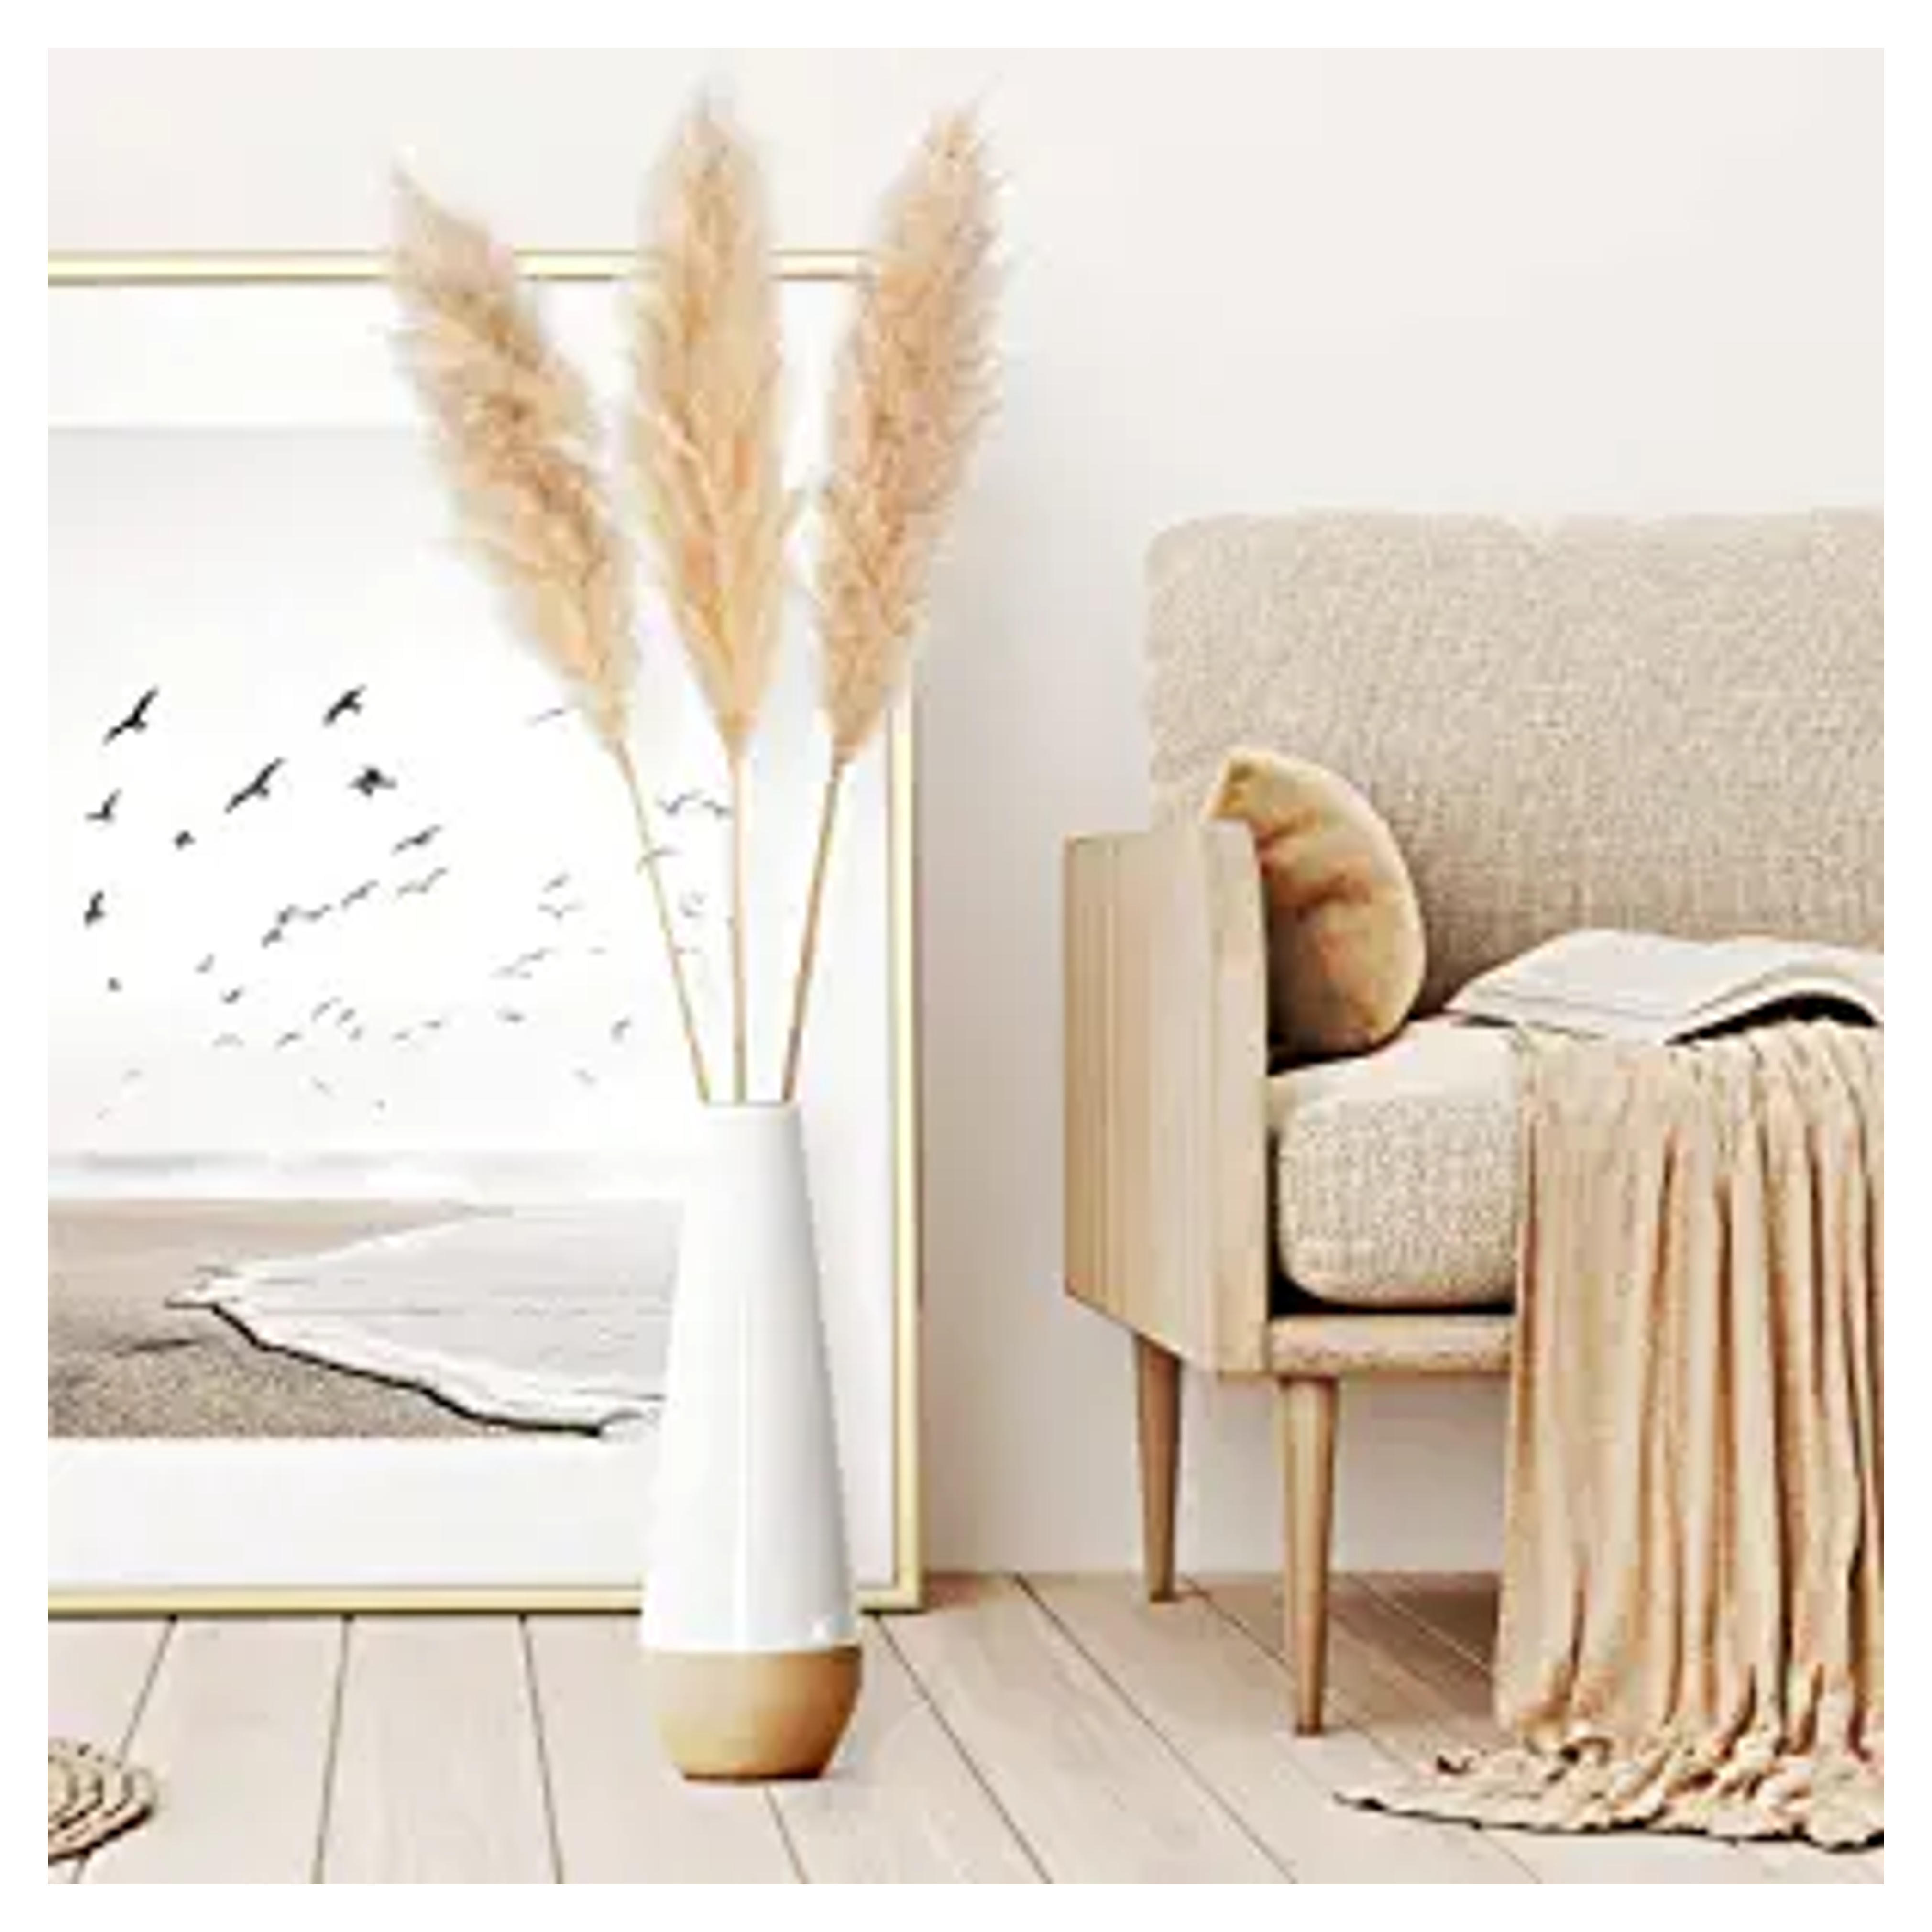 Amazon.com: Pampas Grass Plant, 47” Inches Tall - 3 Large Naturally Dried Beige Stems - Add to Your Boho Home Decor, Fluffy Office Flower Arrangements, Chic Living Room, Wedding Floor Vases, and Party Decorations : Home & Kitchen